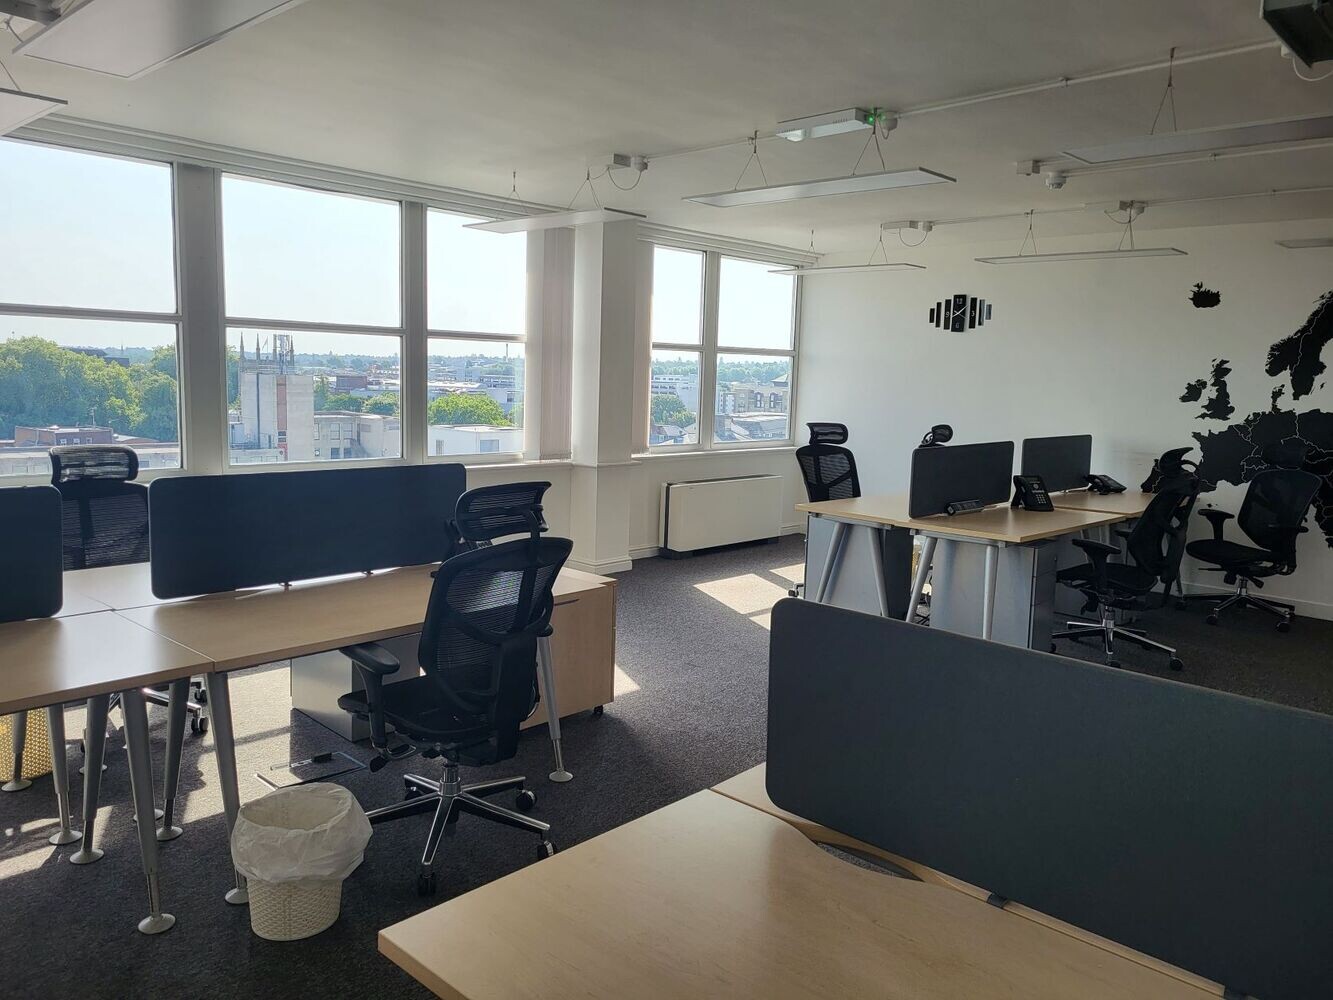 Flexible serviced offices to let in Reading